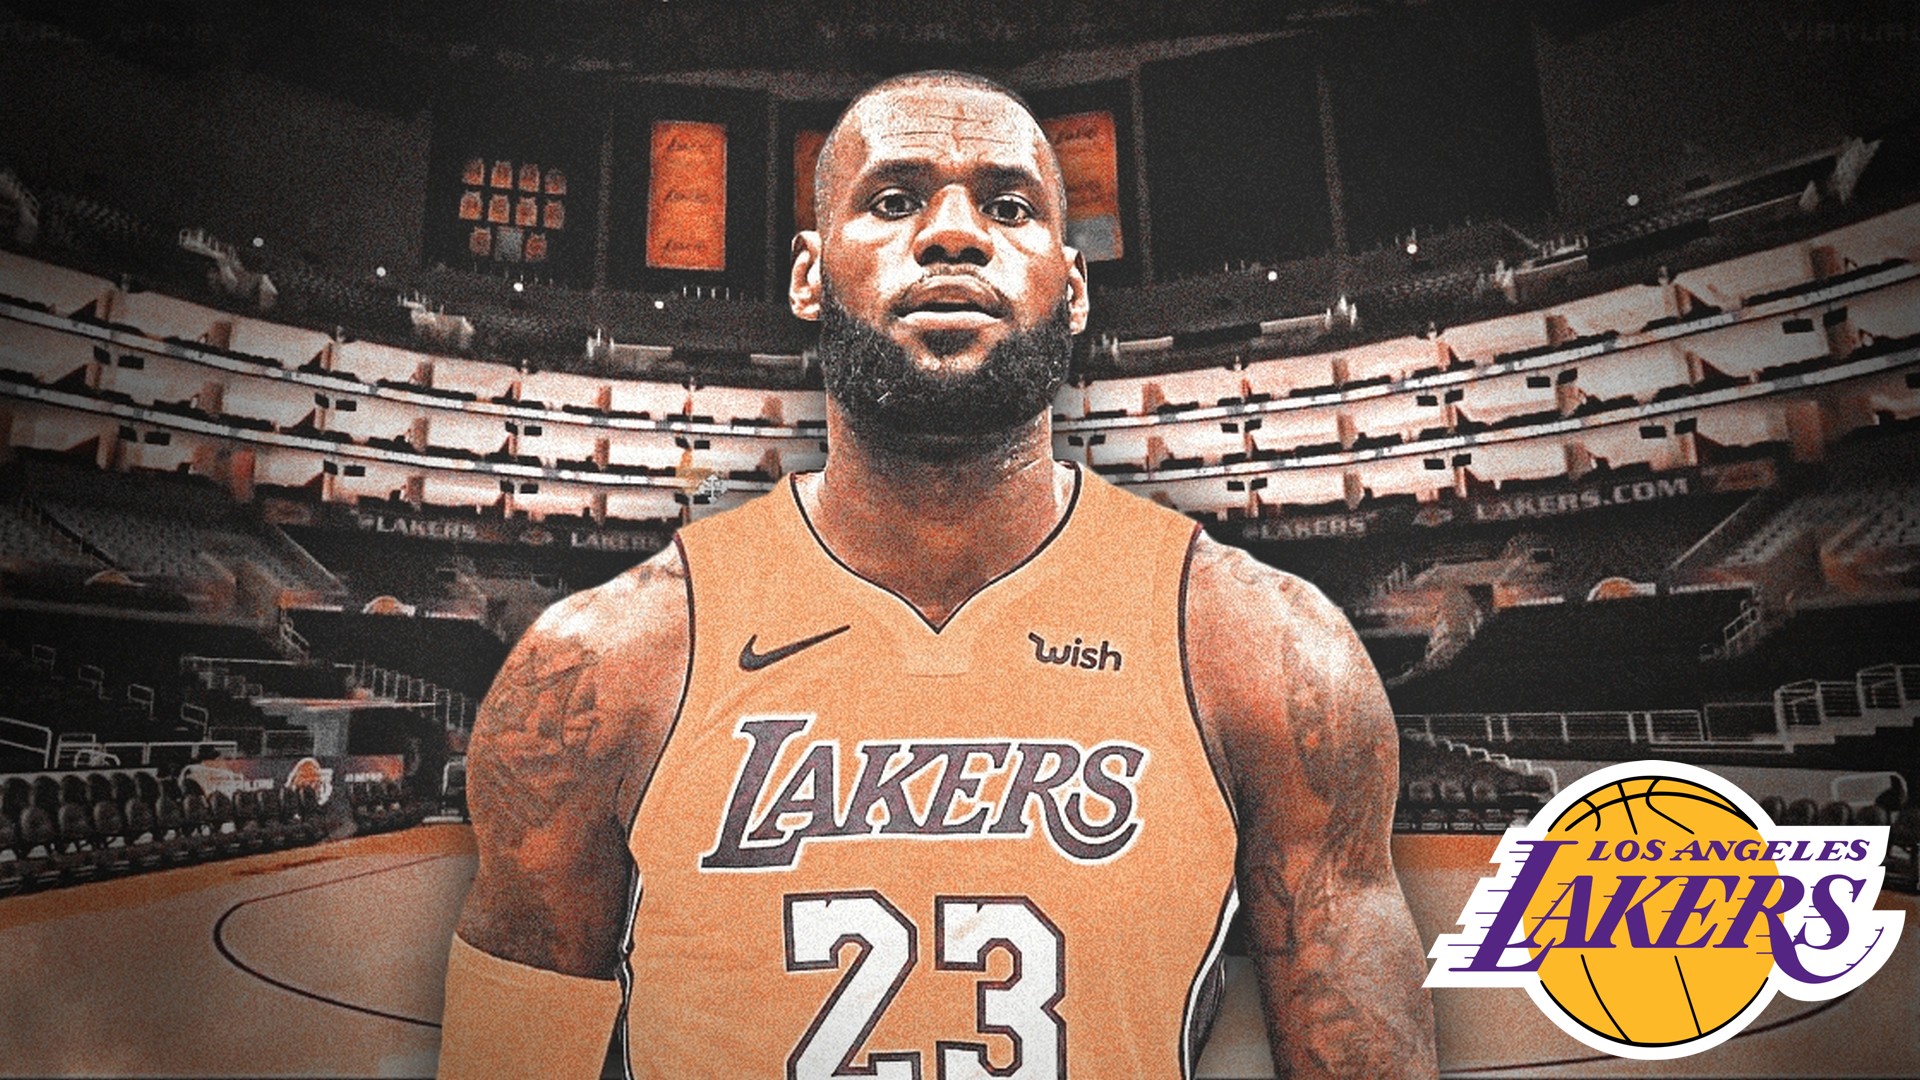 LeBron James Lakers Backgrounds HD with image dimensions 1920X1080 pixel. You can make this wallpaper for your Desktop Computer Backgrounds, Windows or Mac Screensavers, iPhone Lock screen, Tablet or Android and another Mobile Phone device